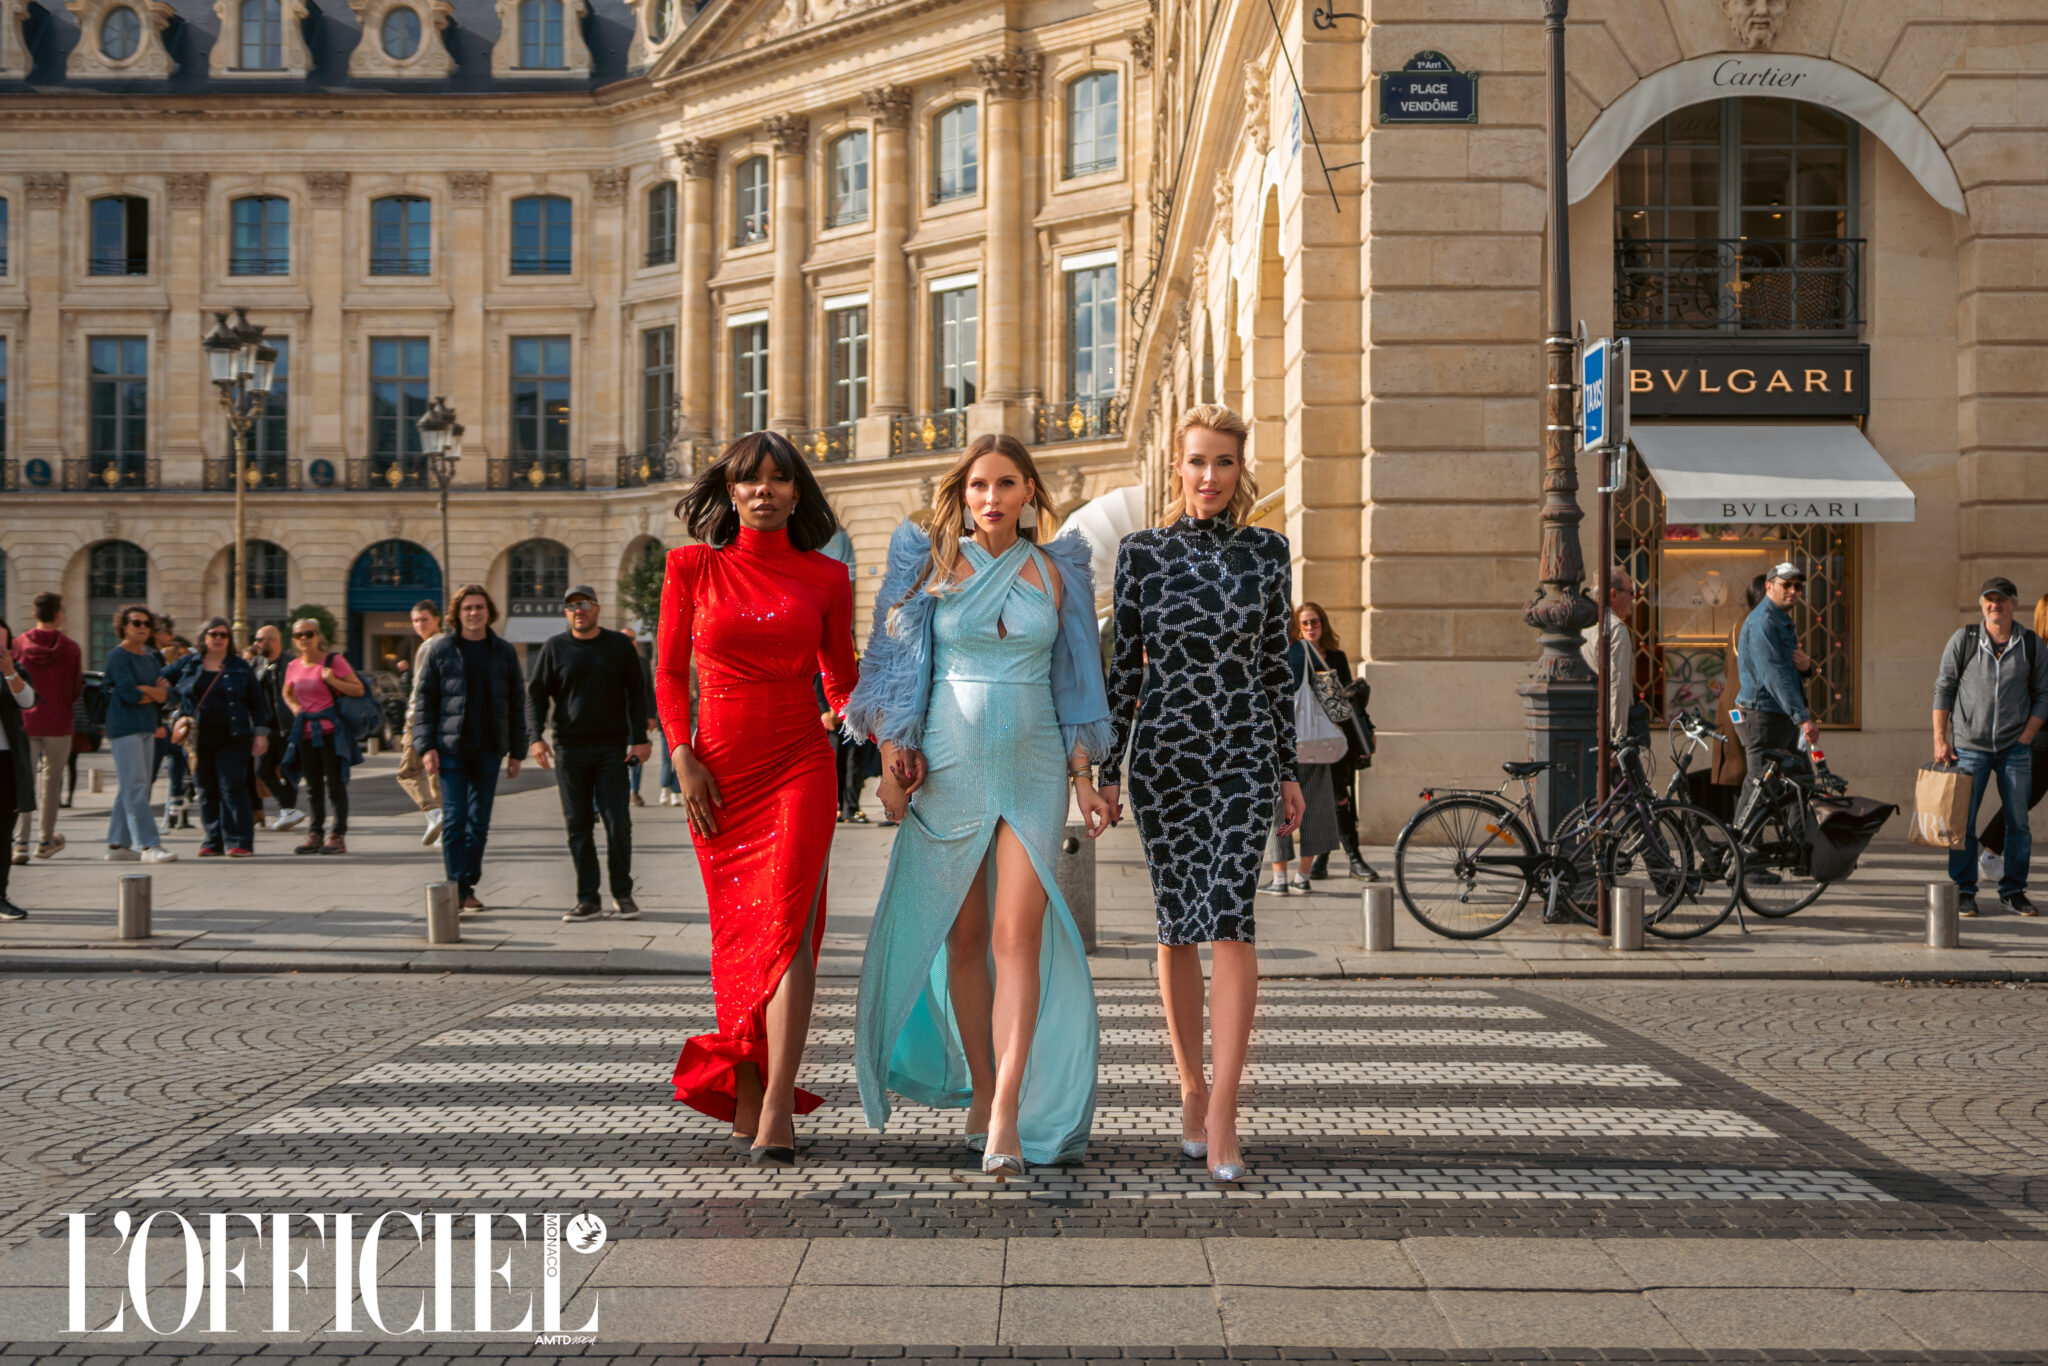 My feature for L'Officiel Monaco during Paris Fashion Week SS 23. Visual Fashion Story from the magical Paris. Featuring: Nicolas Besson, Gemy Maalouf, Charriol, Sol Angelann and more.